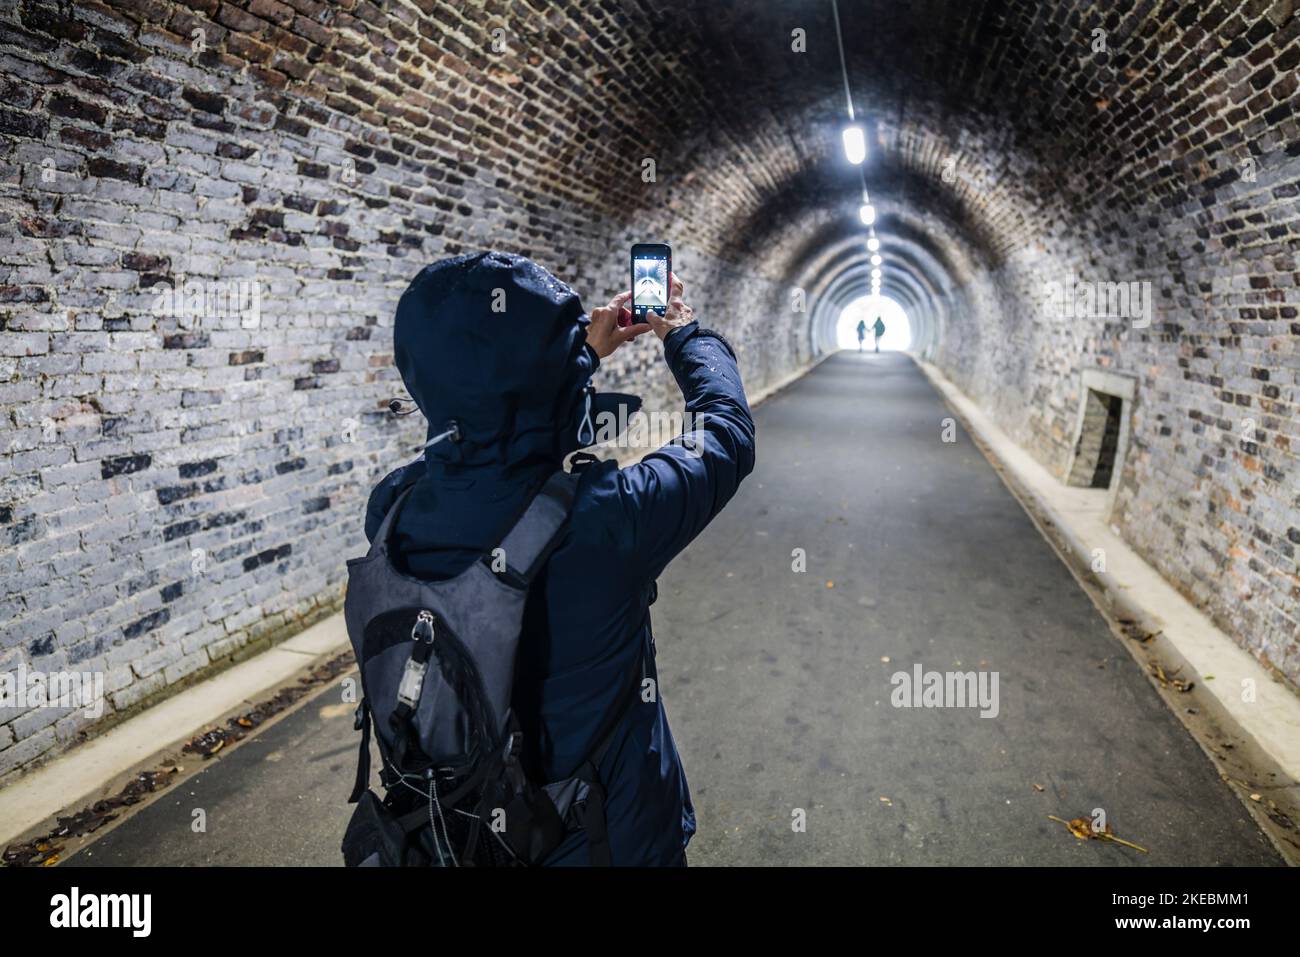 Female photographing in a tunnel on the Keswick rail trail with her mobile phone, English Lake District. Stock Photo